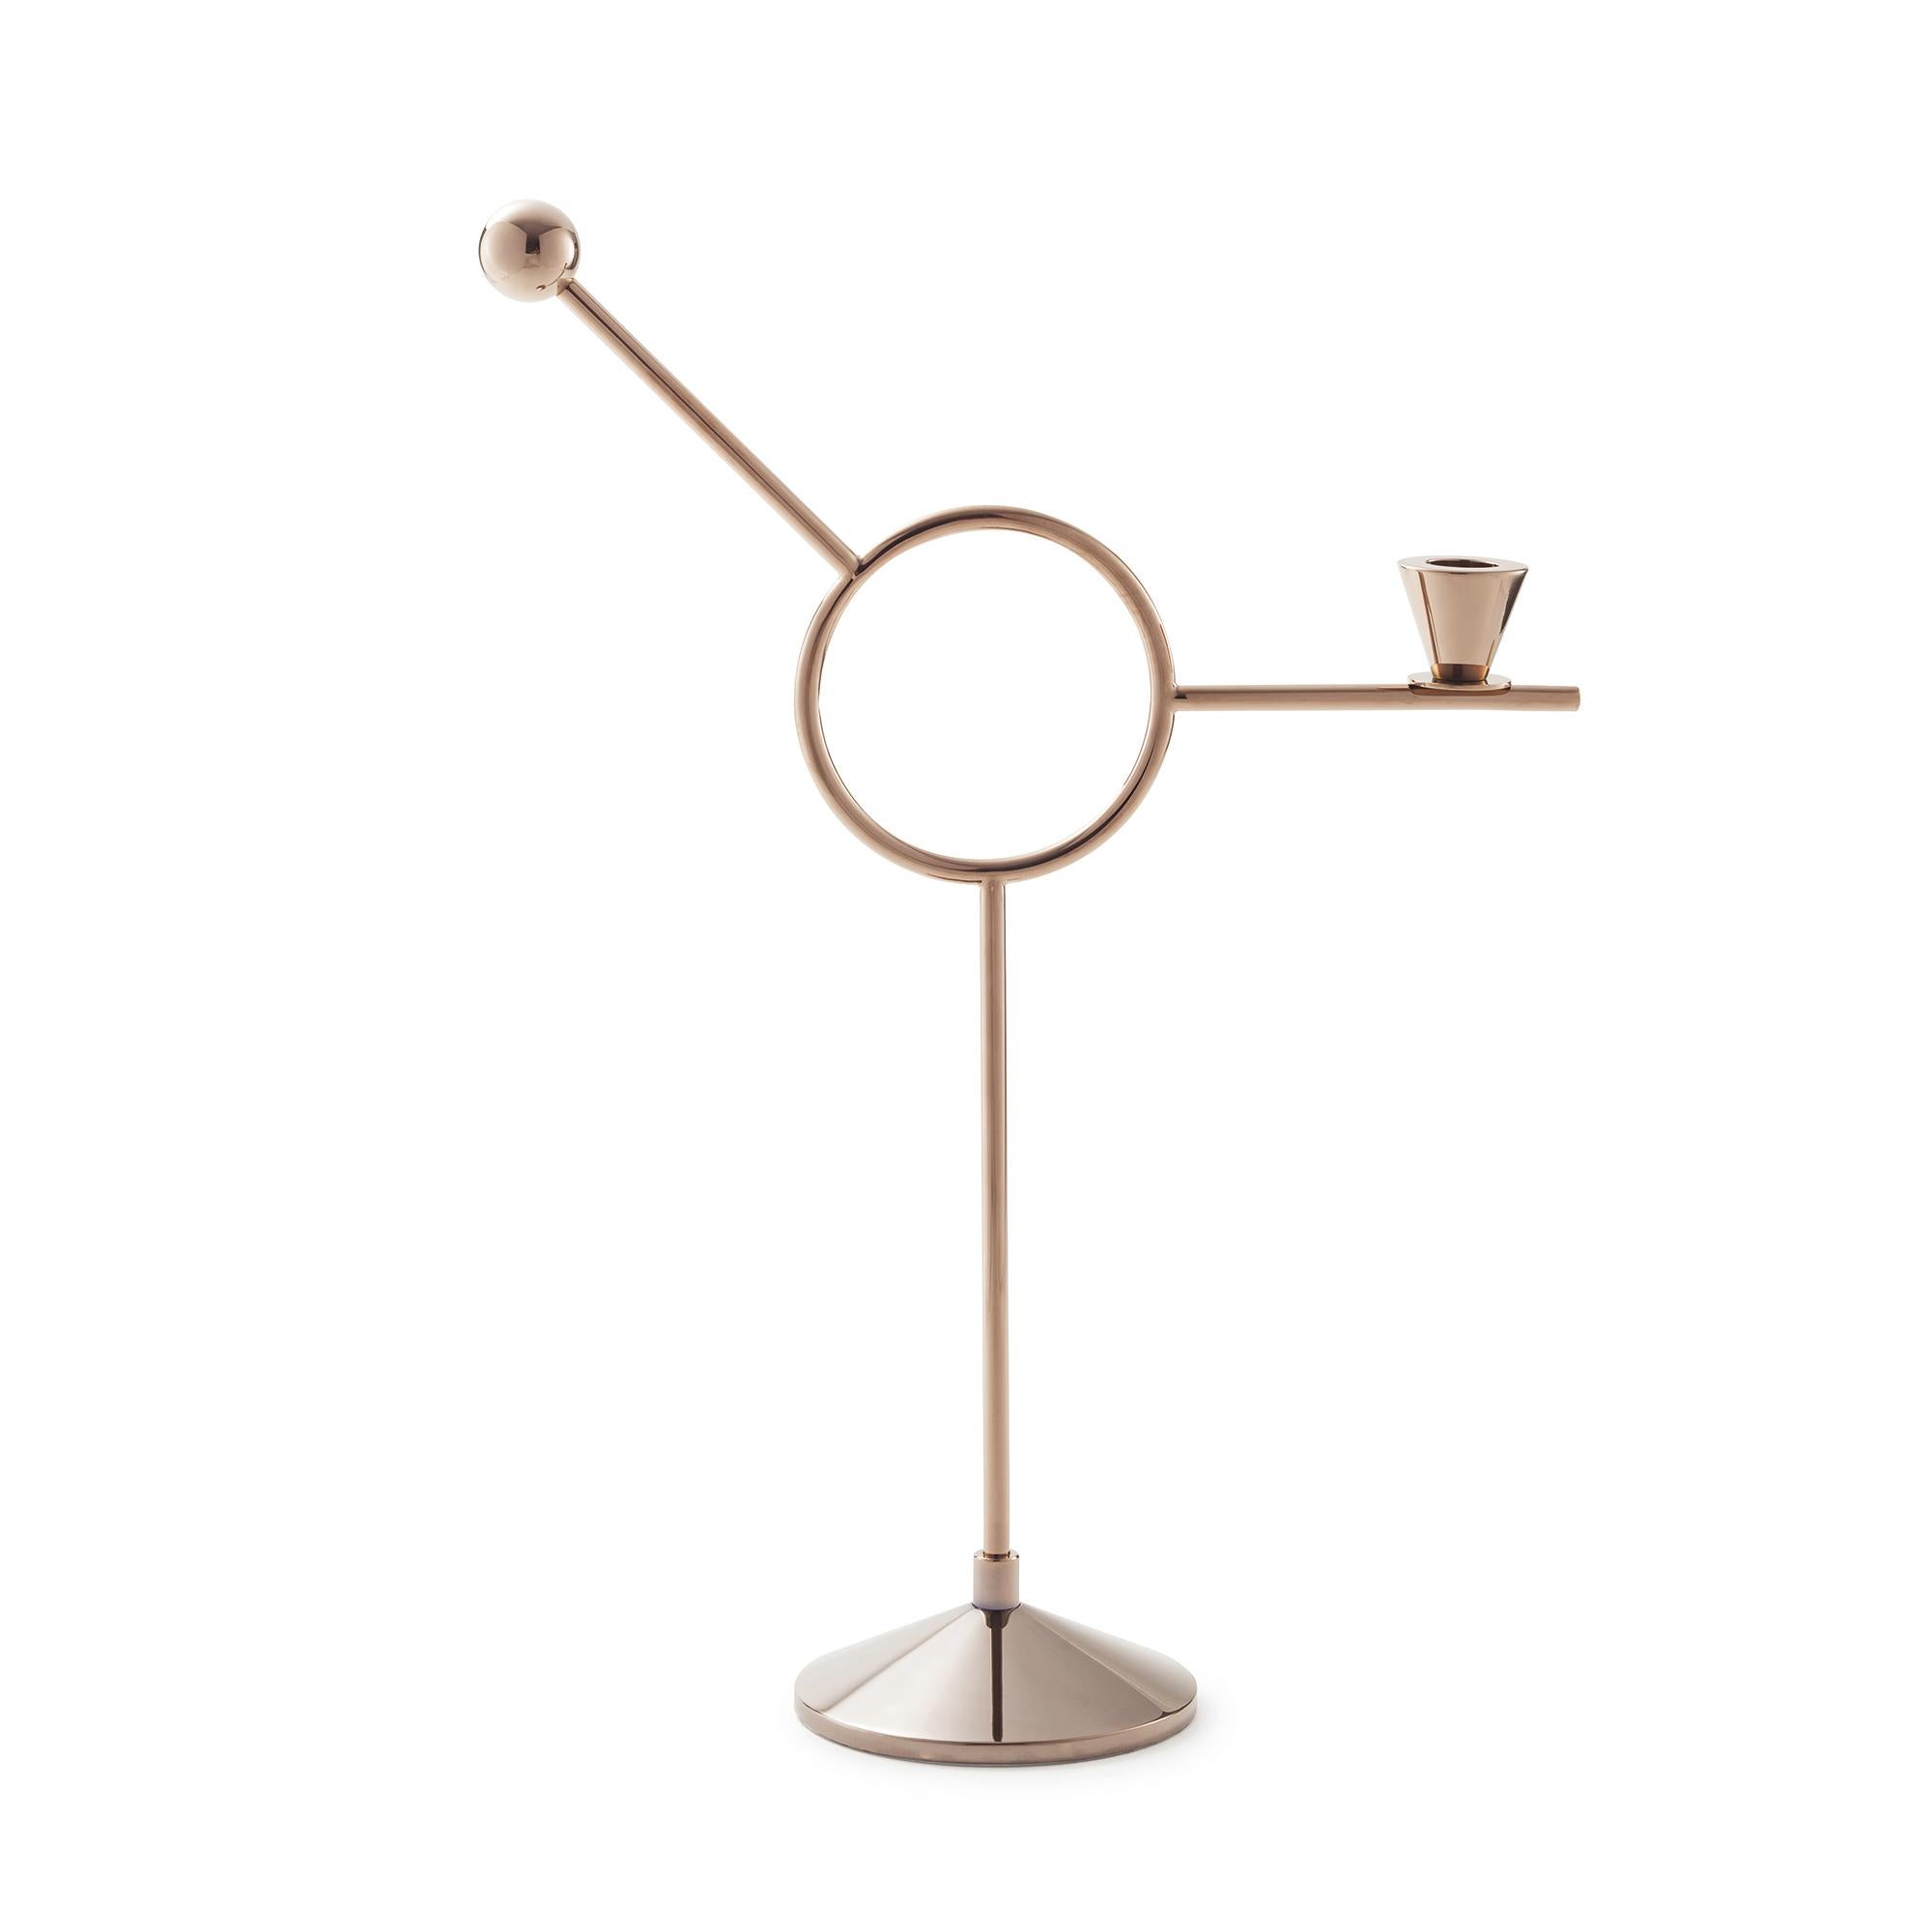 Paris Memphis N°8 candleholder by Thomas Dariel
Dimensions: D 12 x W 32.4 x H 44.5 cm 
Materials: Plated metal coated with glossy pink copper finish. 
Also available in other dimensions.


Paris-Memphis capsule collection draws its inspiration